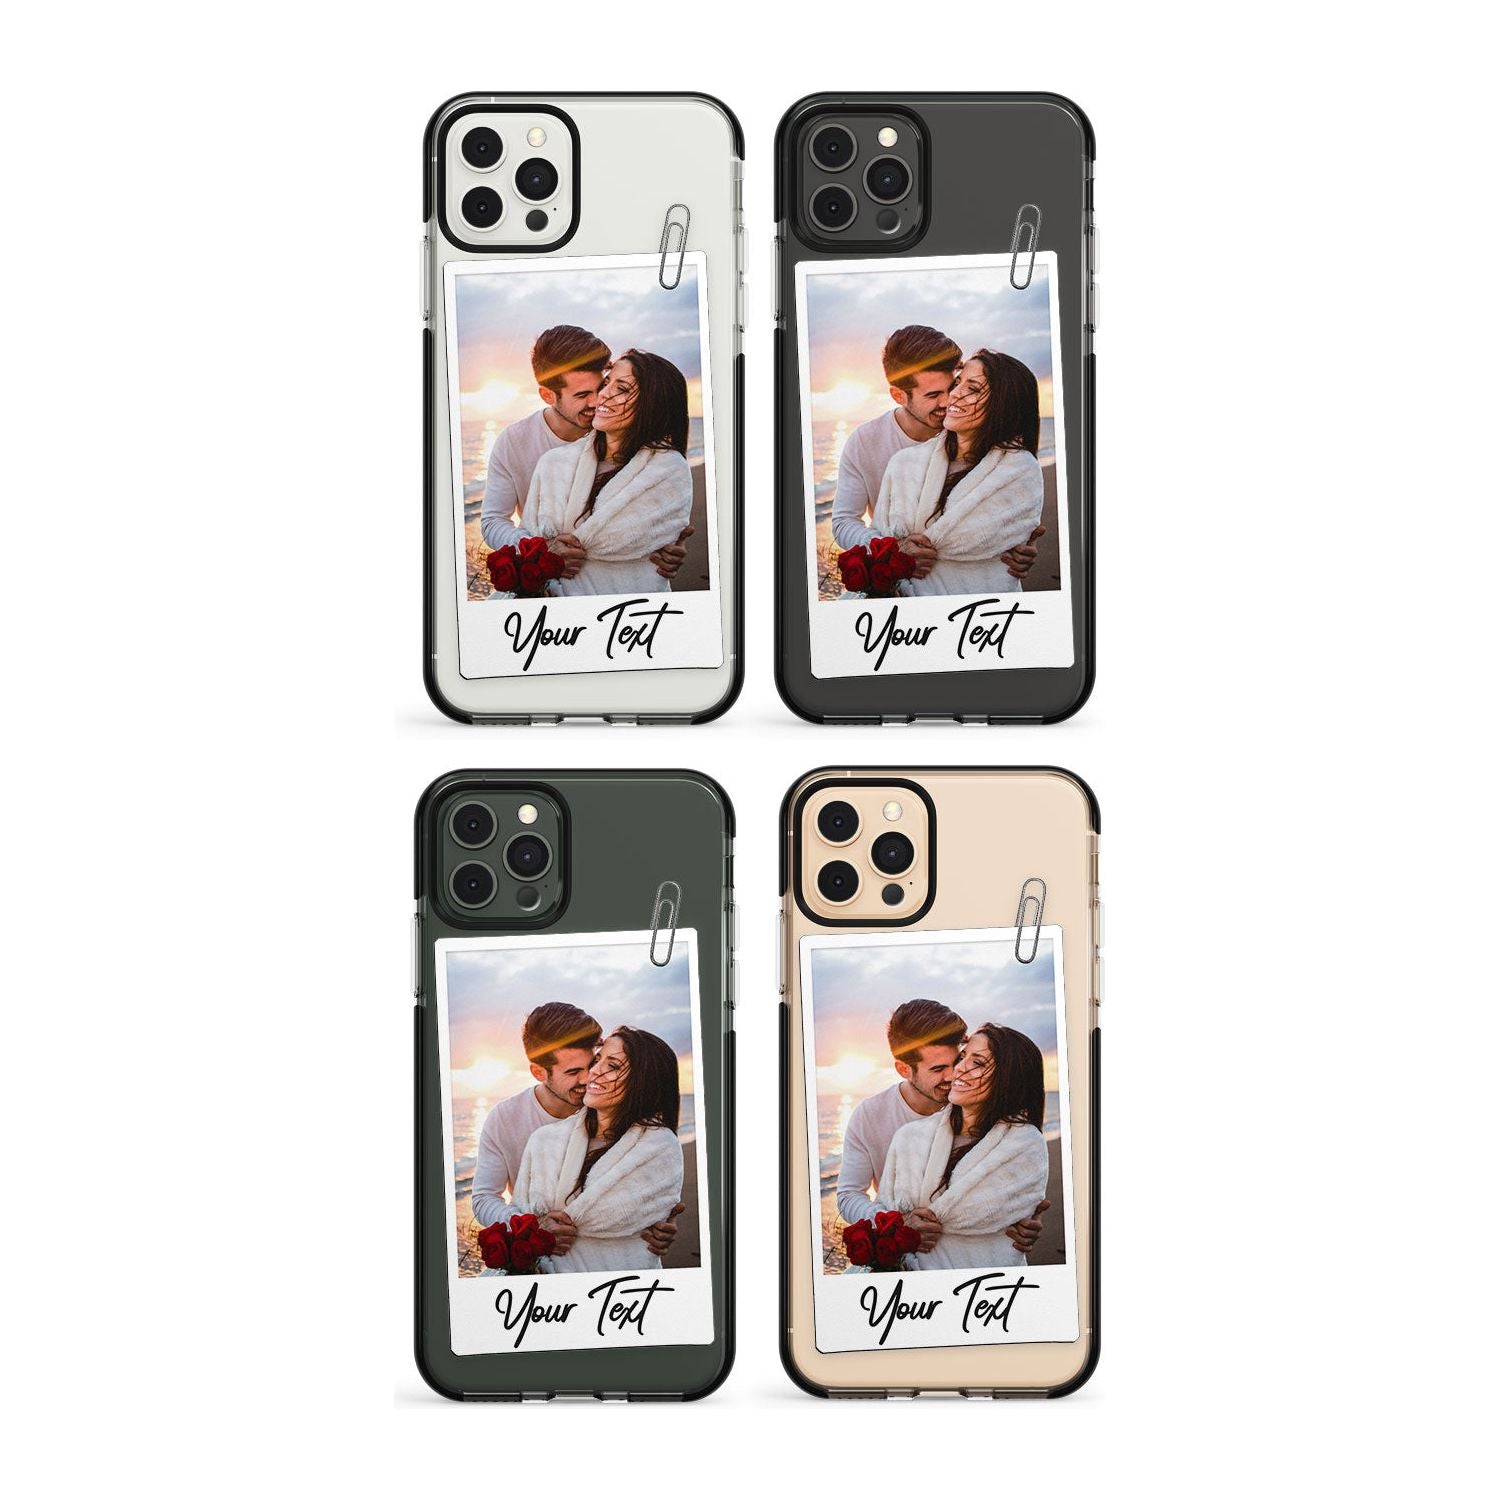 Personalised Vinyl Record Impact Phone Case for iPhone 11, iphone 12